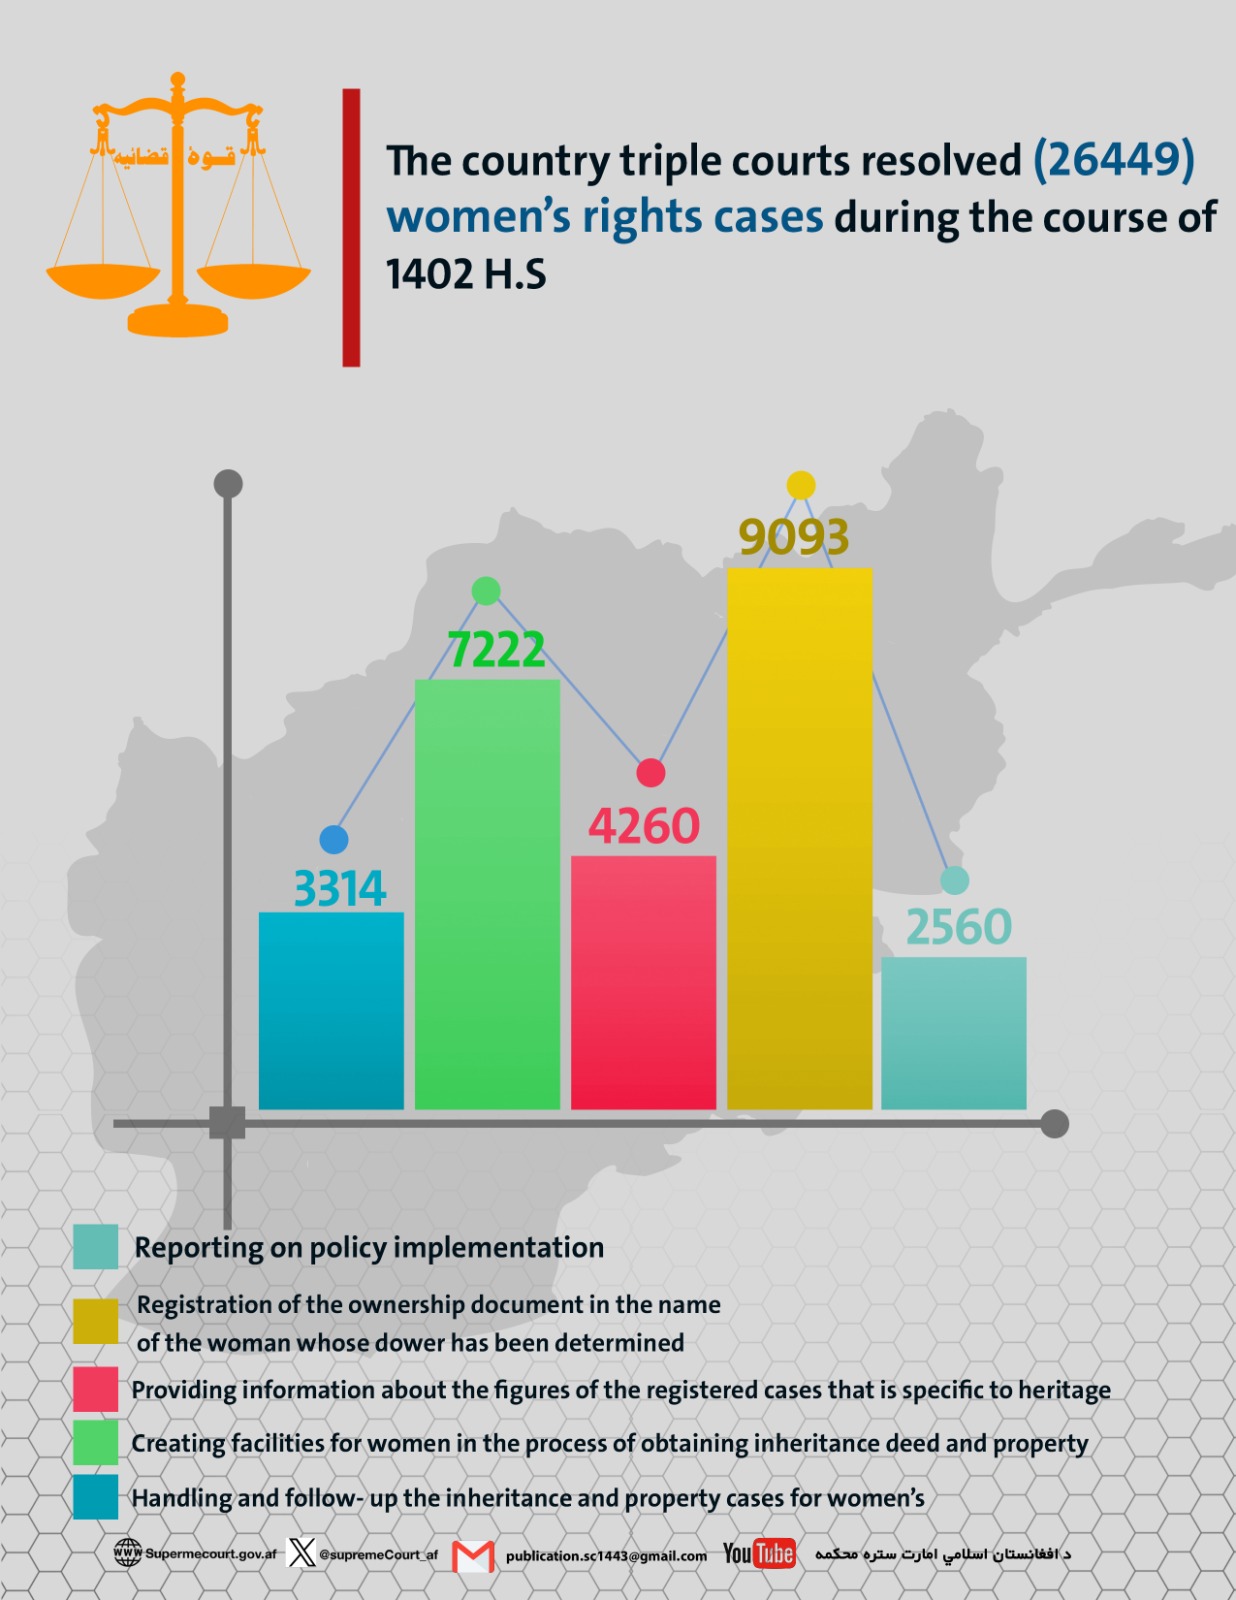 The country triple courts resolved (26449) women’s rights cases during the course of 1402 H.S